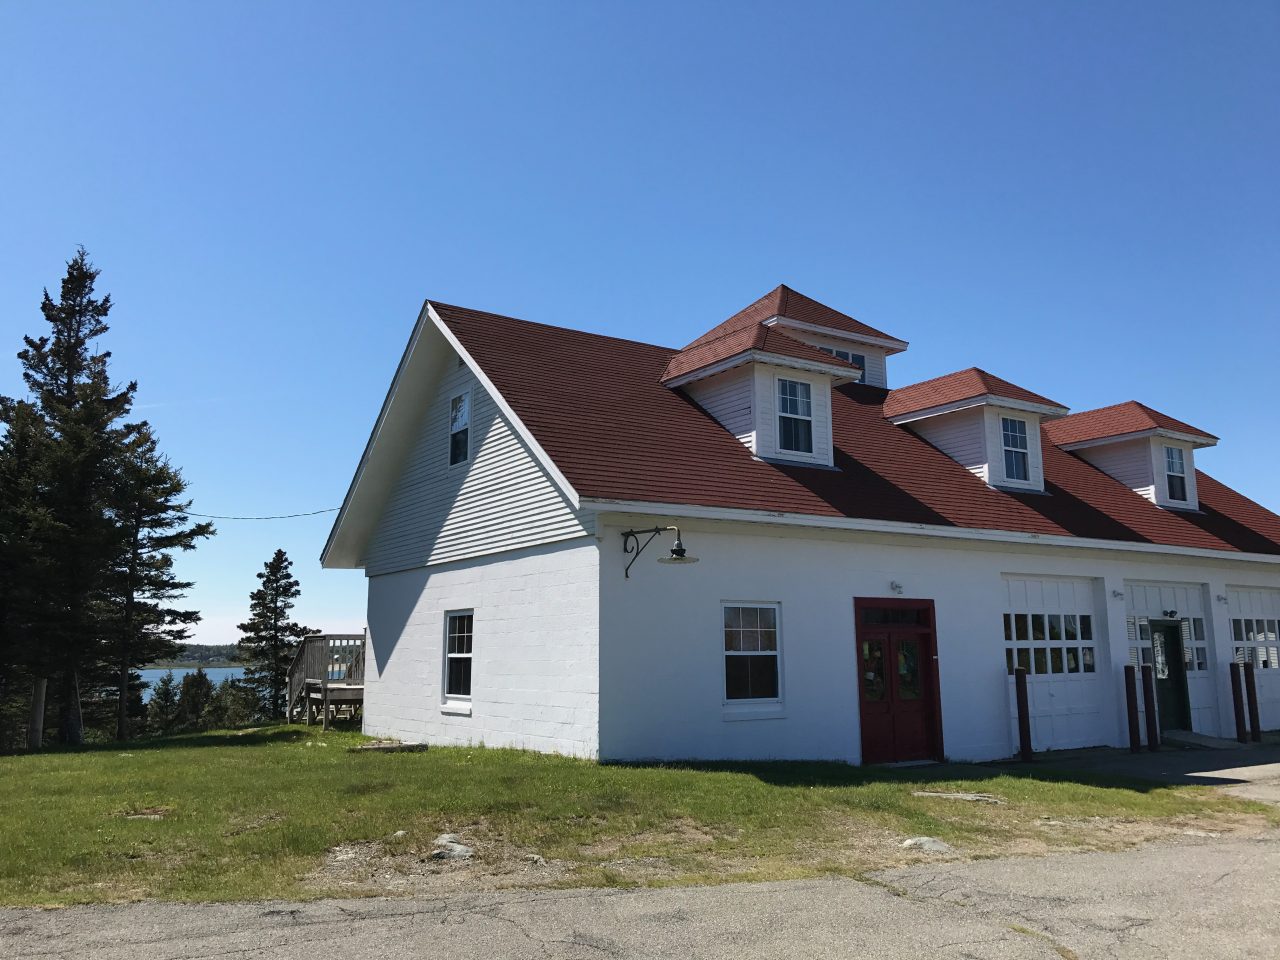 West Quoddy Station | At Quoddy Station